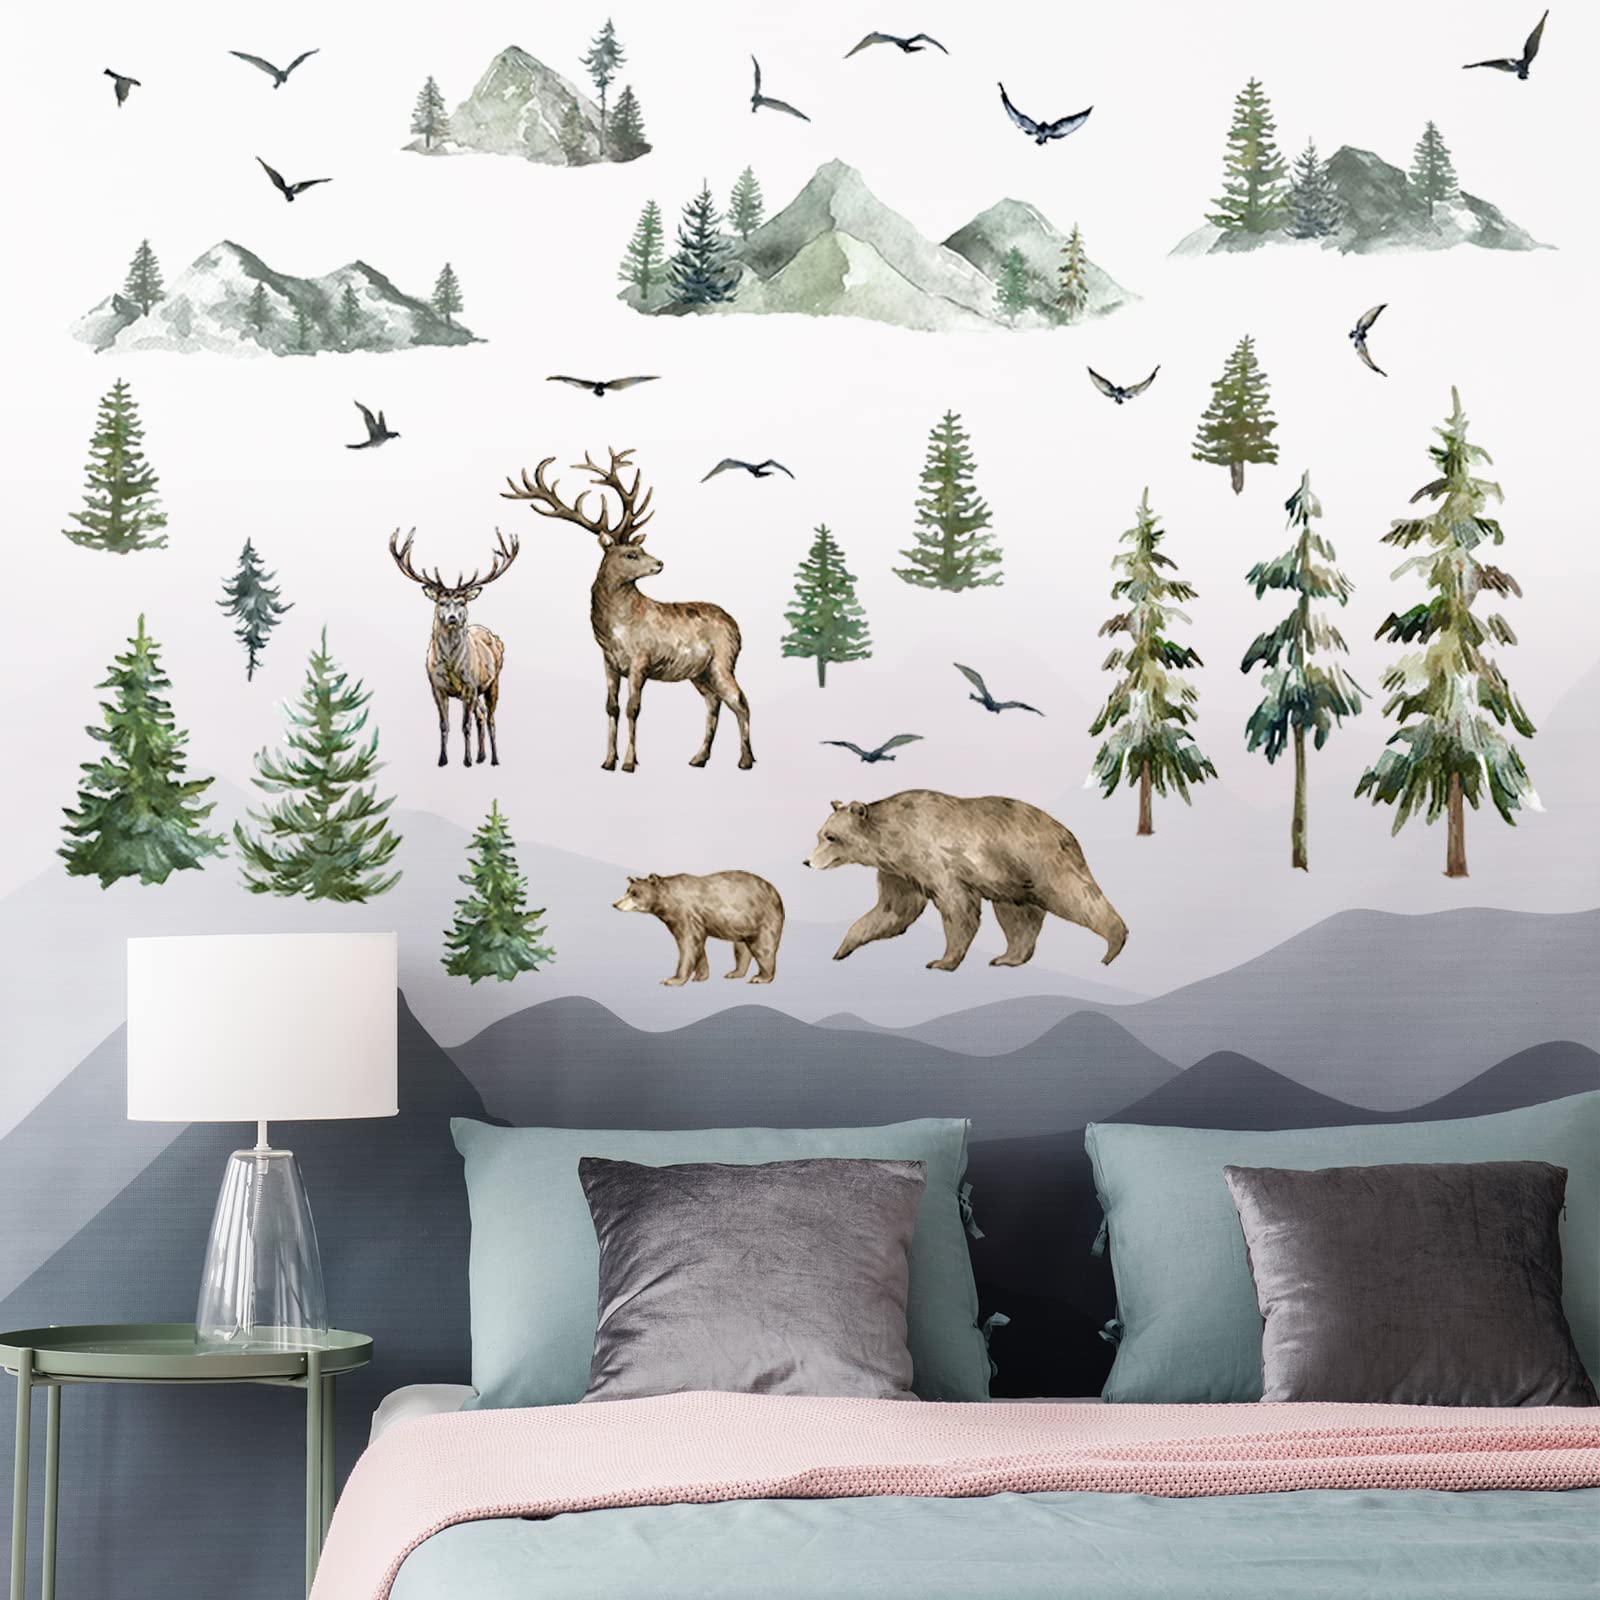 Mountain Wall Decals Large Pine Tree Wall Decals Peel and Stick Forest Tree Deer Birds Animal Wall Decals Mountain Tree Wall Stickers for Kids Room Nursery Decor